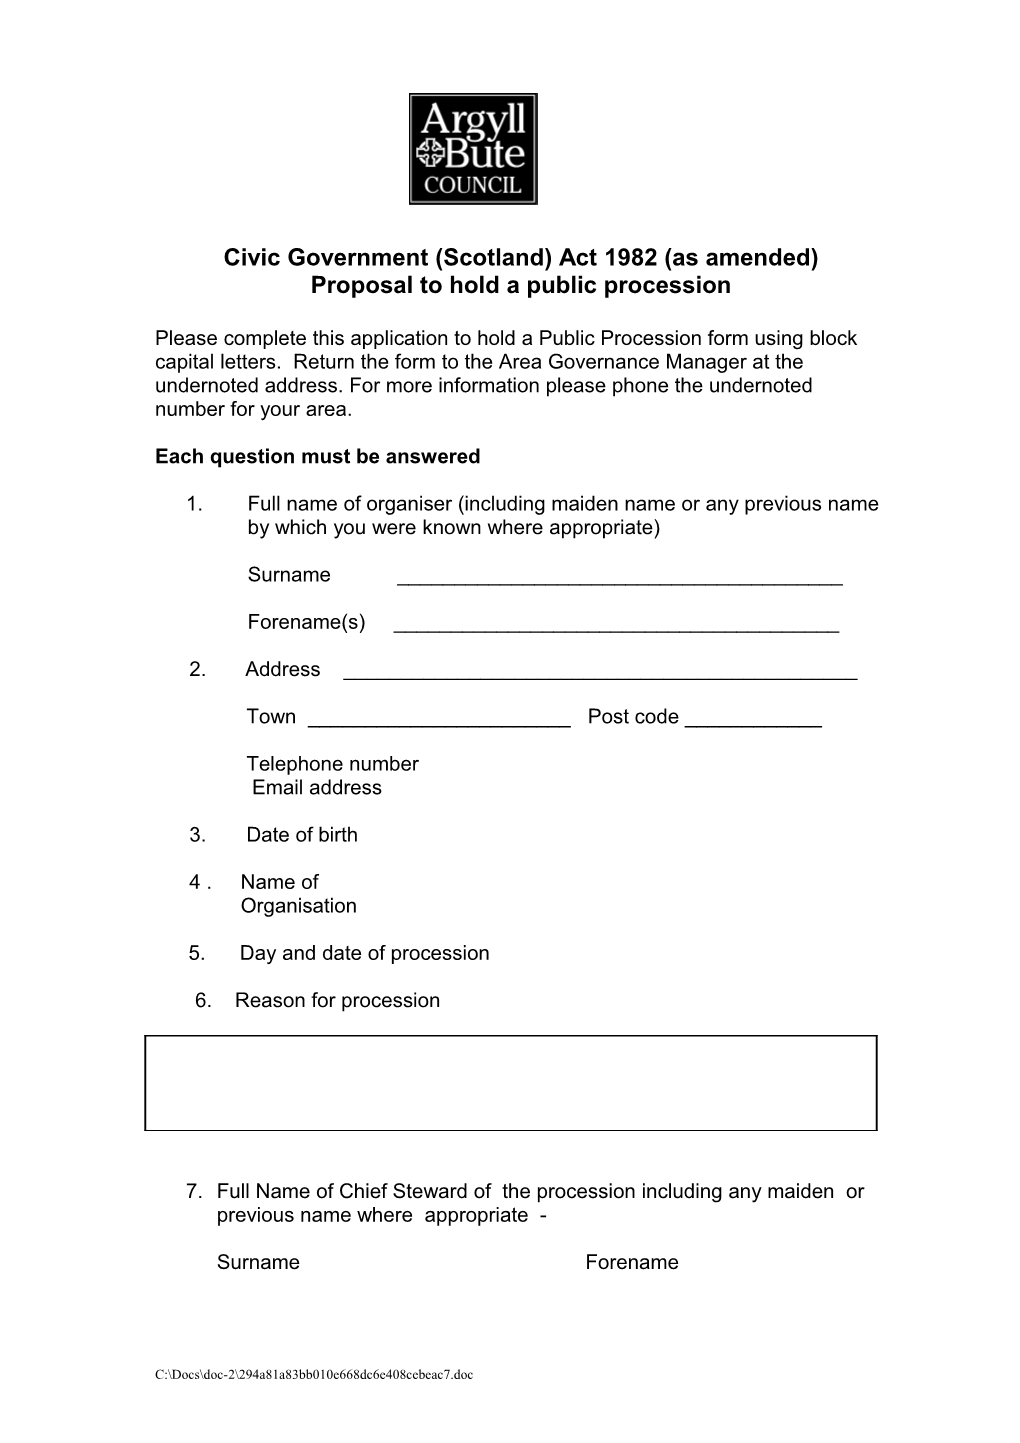 Civic Government (Scotland) Act 1982 (As Amended)